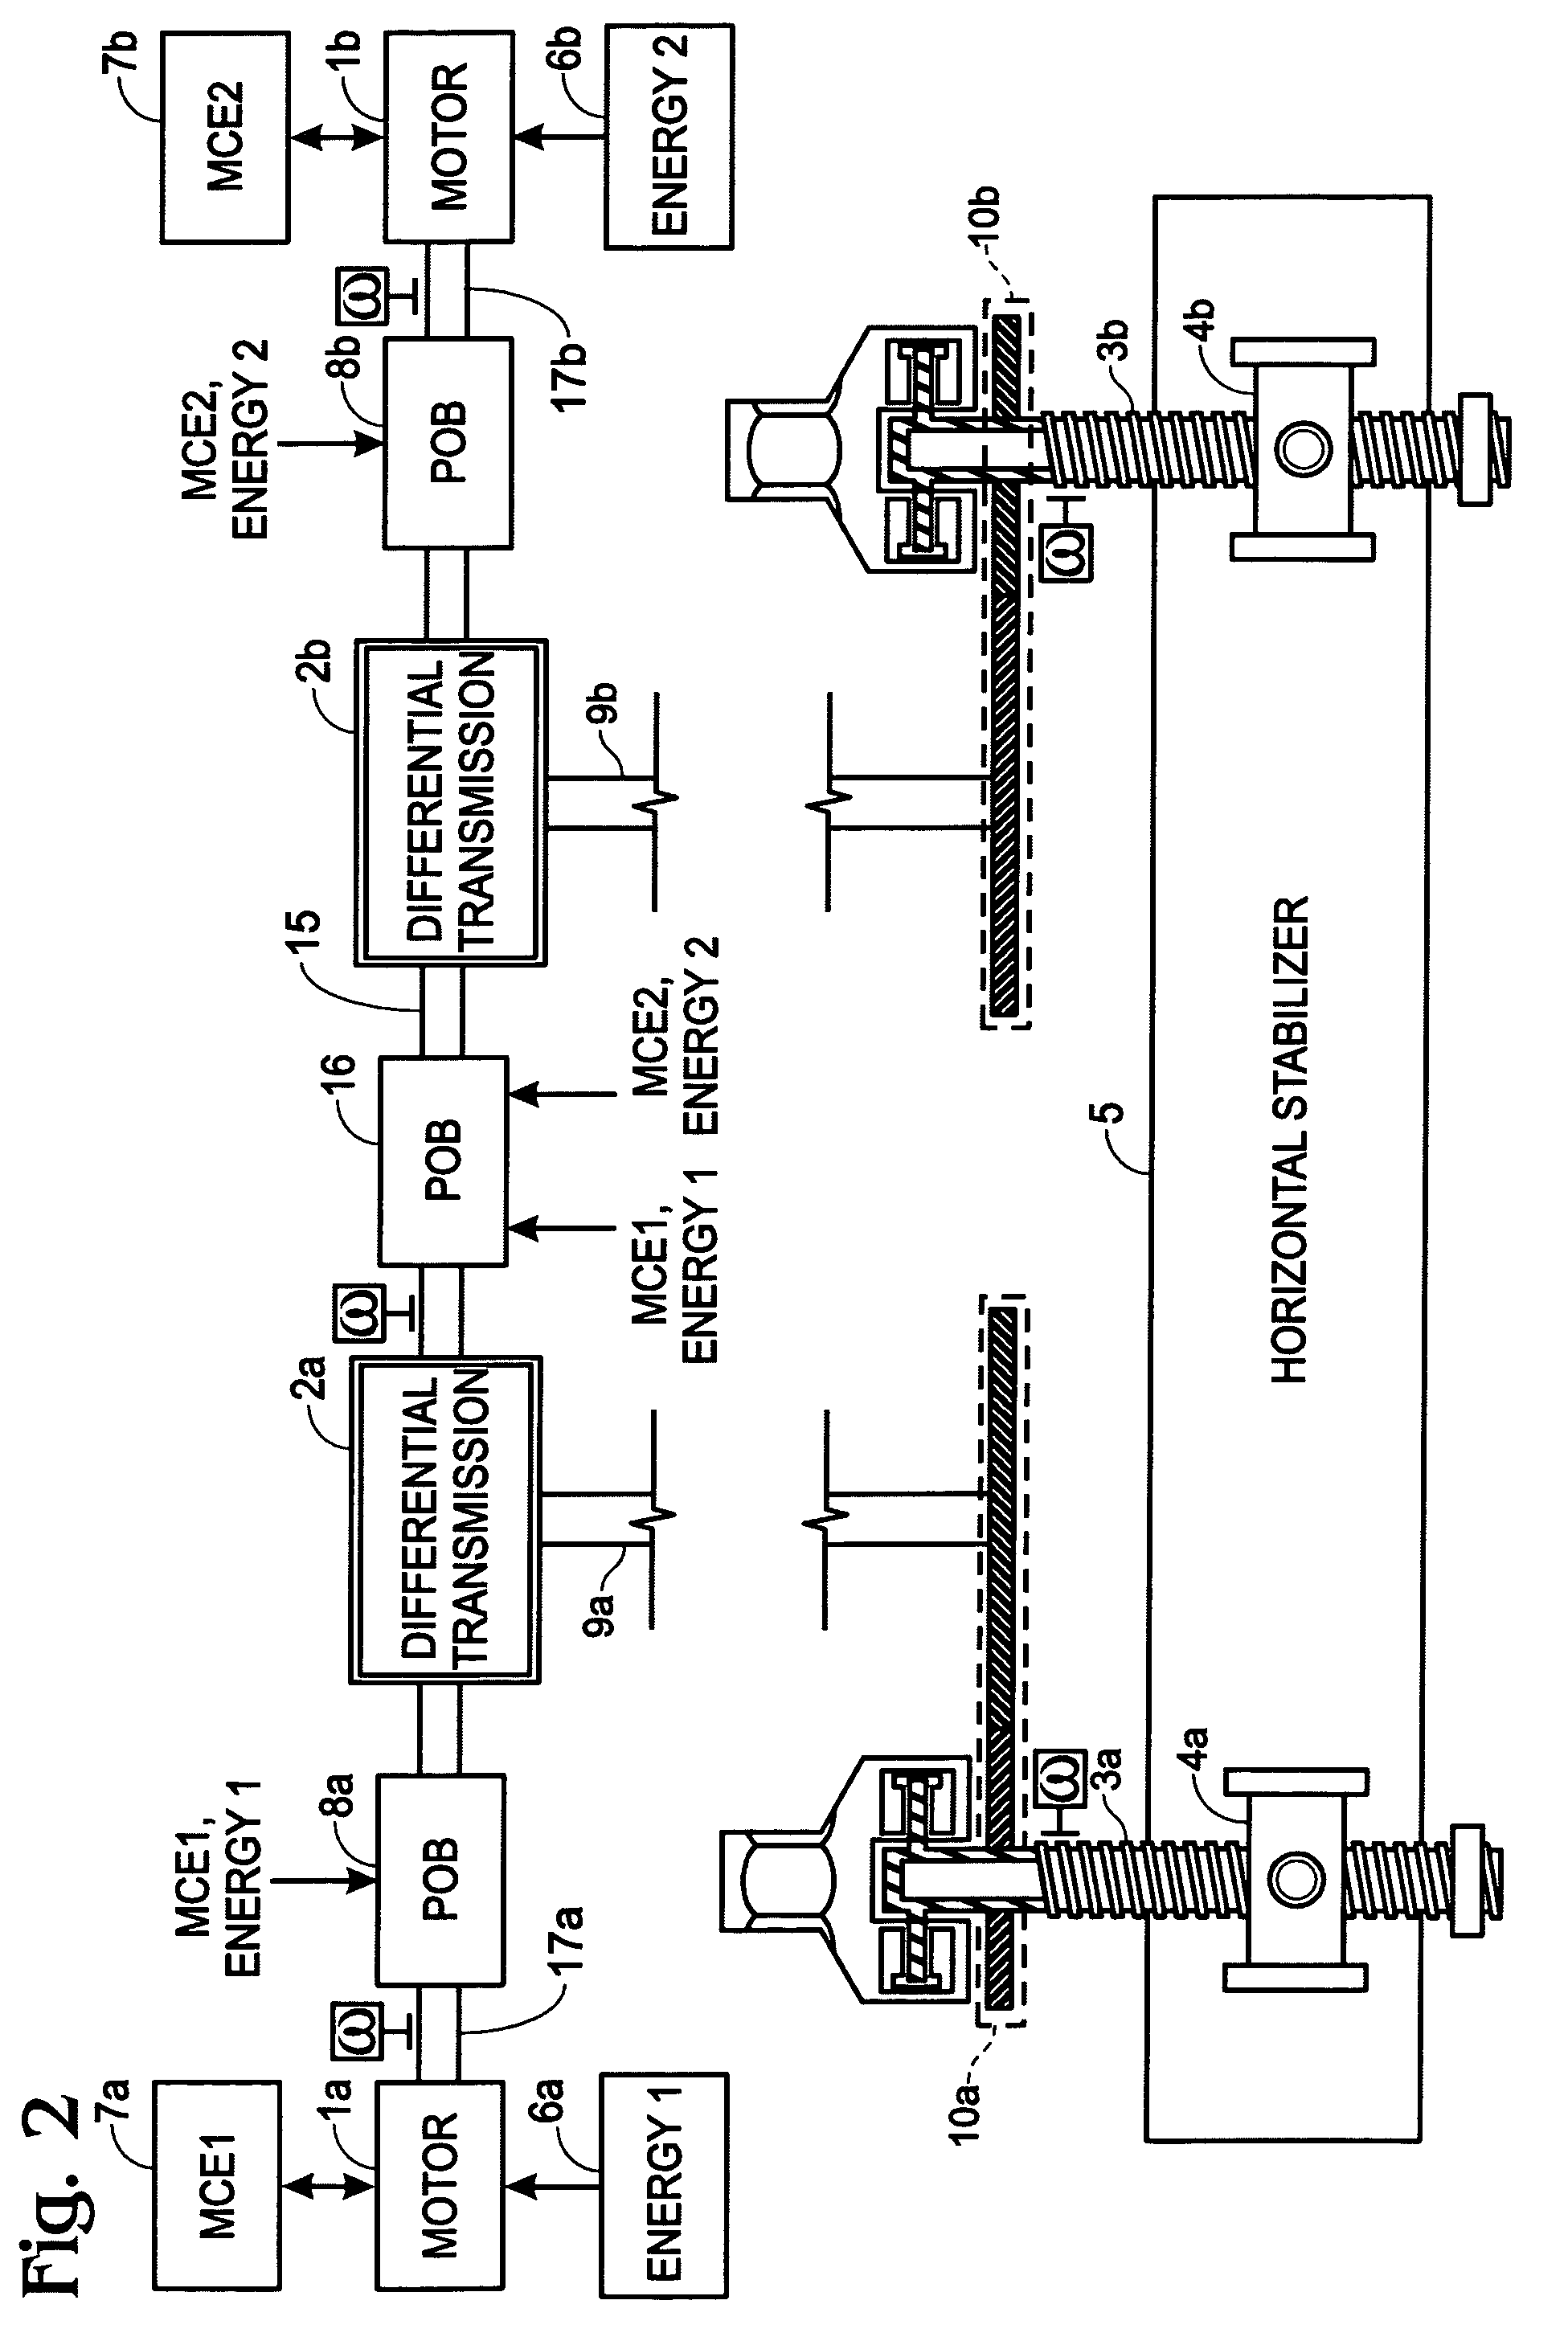 Apparatus for the adjustment of horizontal stabilizers for aircraft